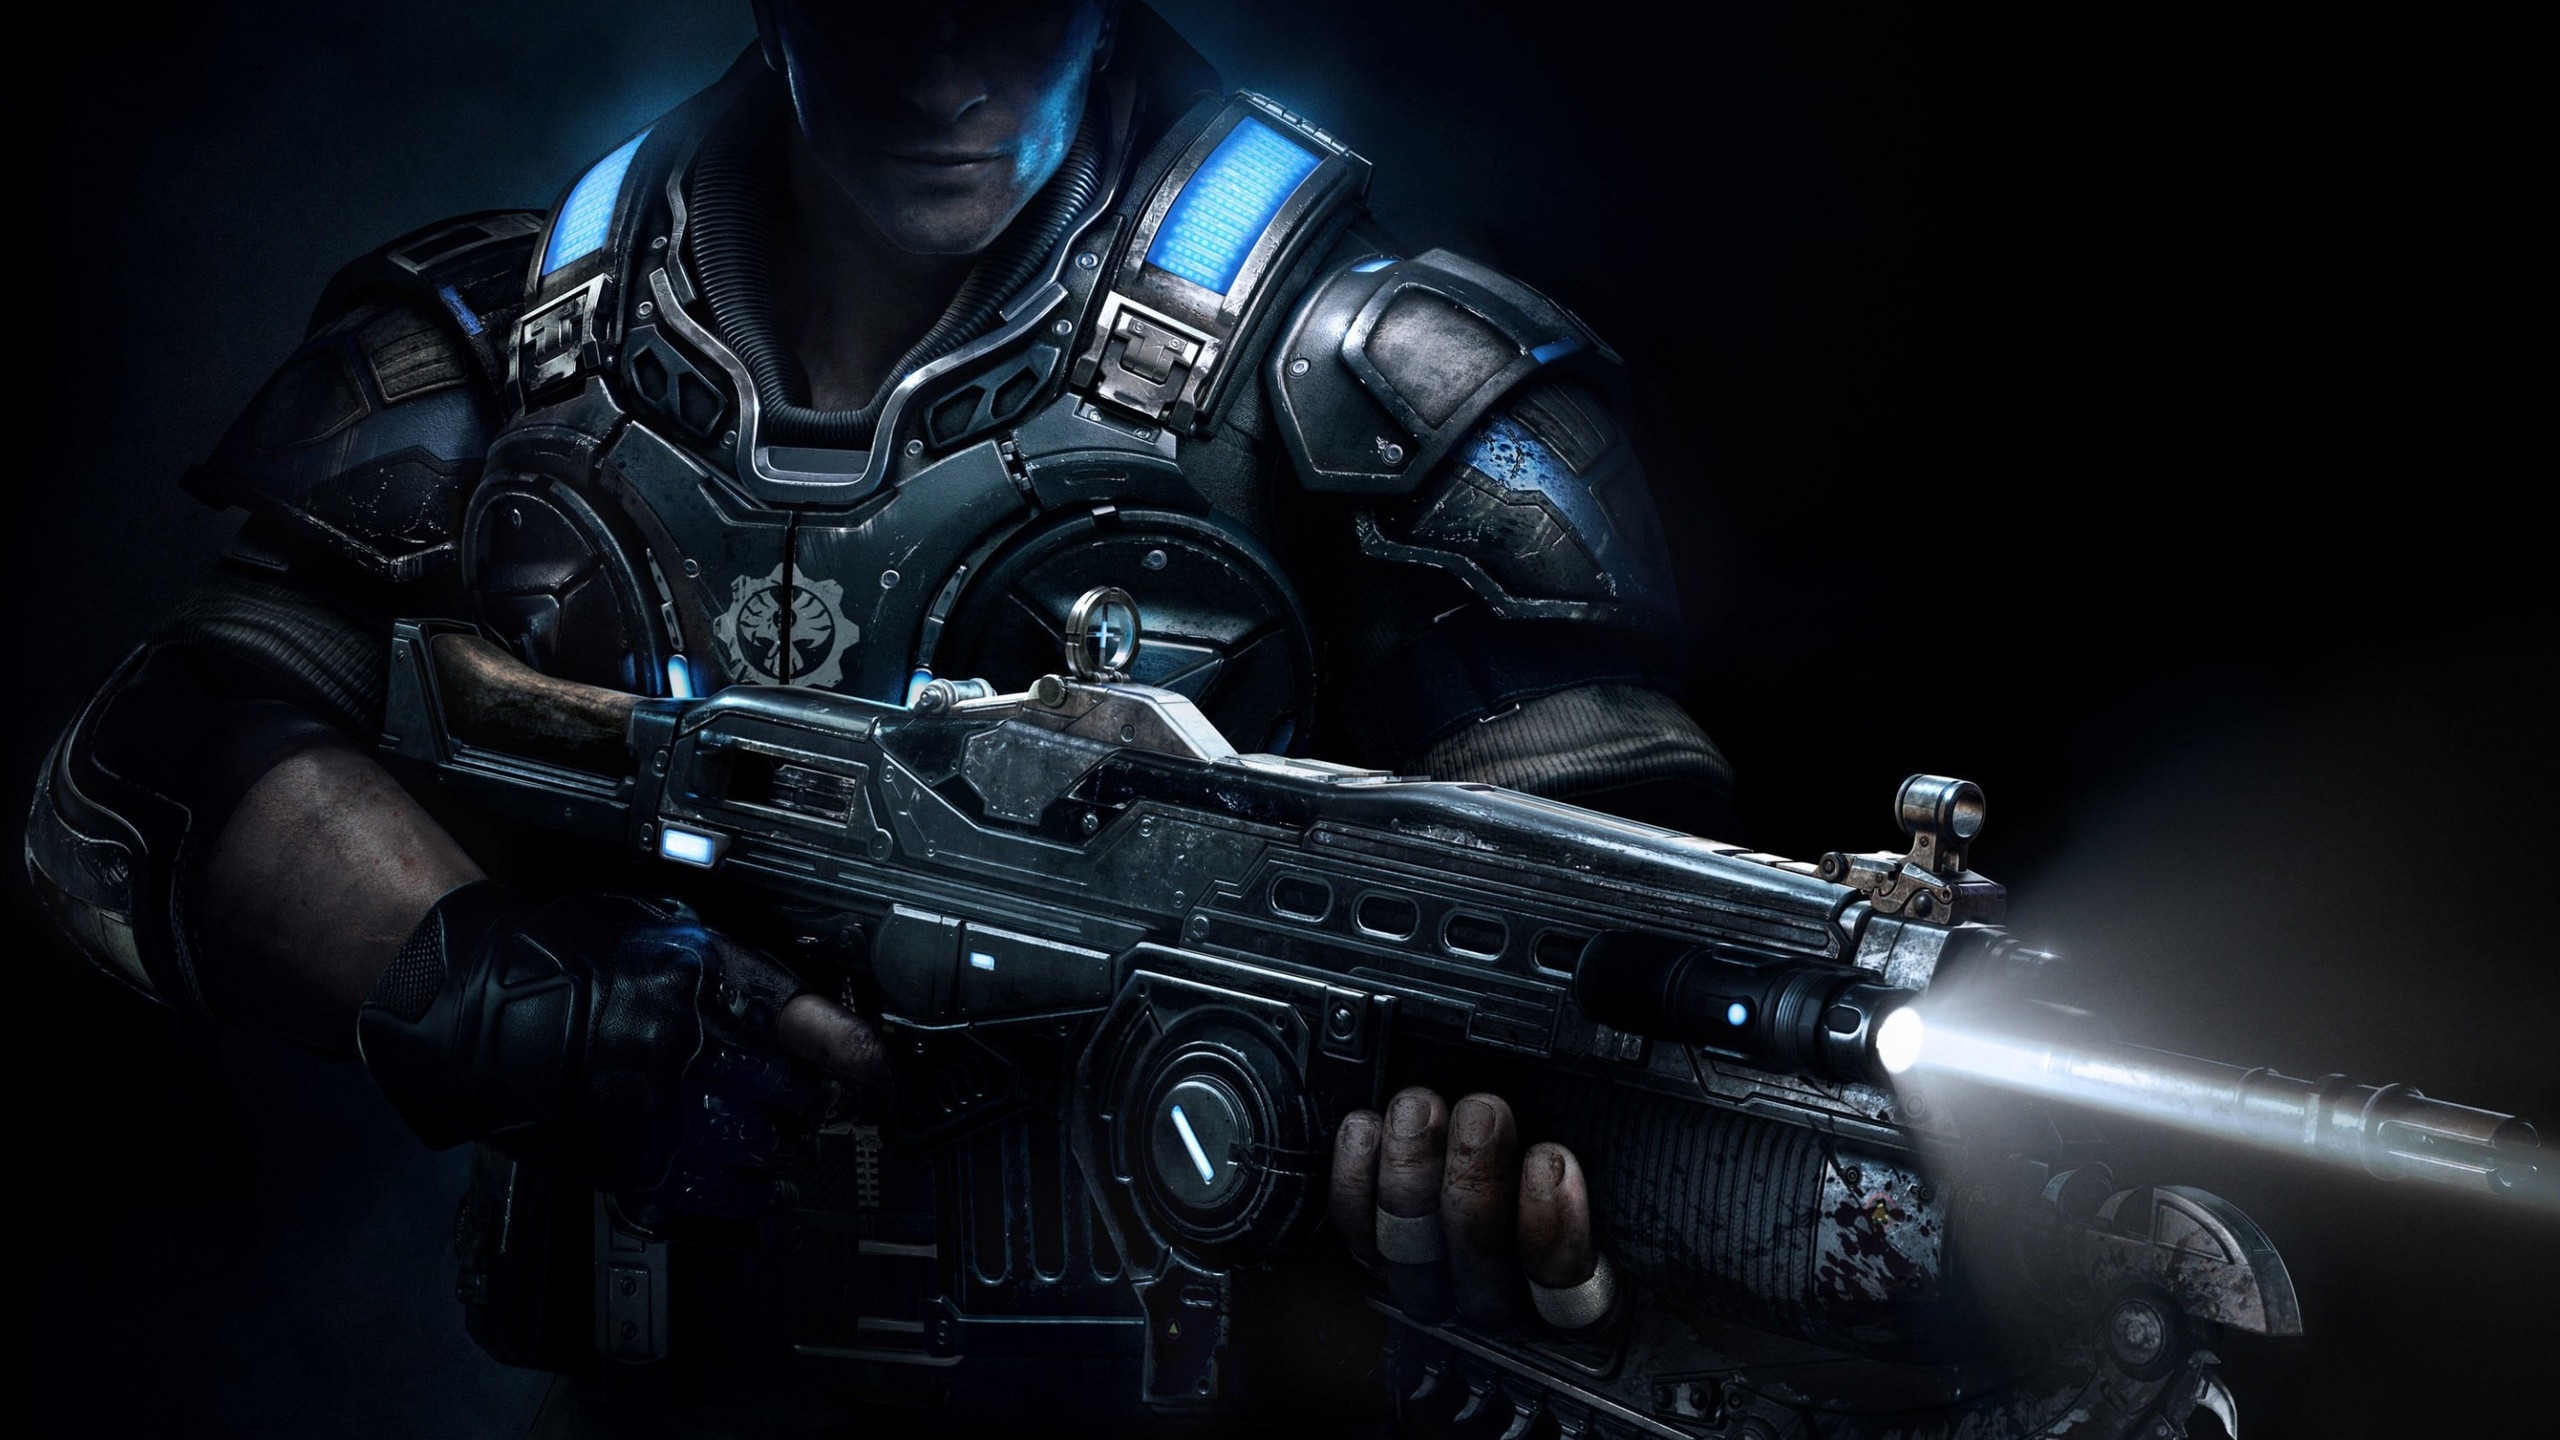 Gears of War 4 Poster for 2560x1440 HDTV resolution